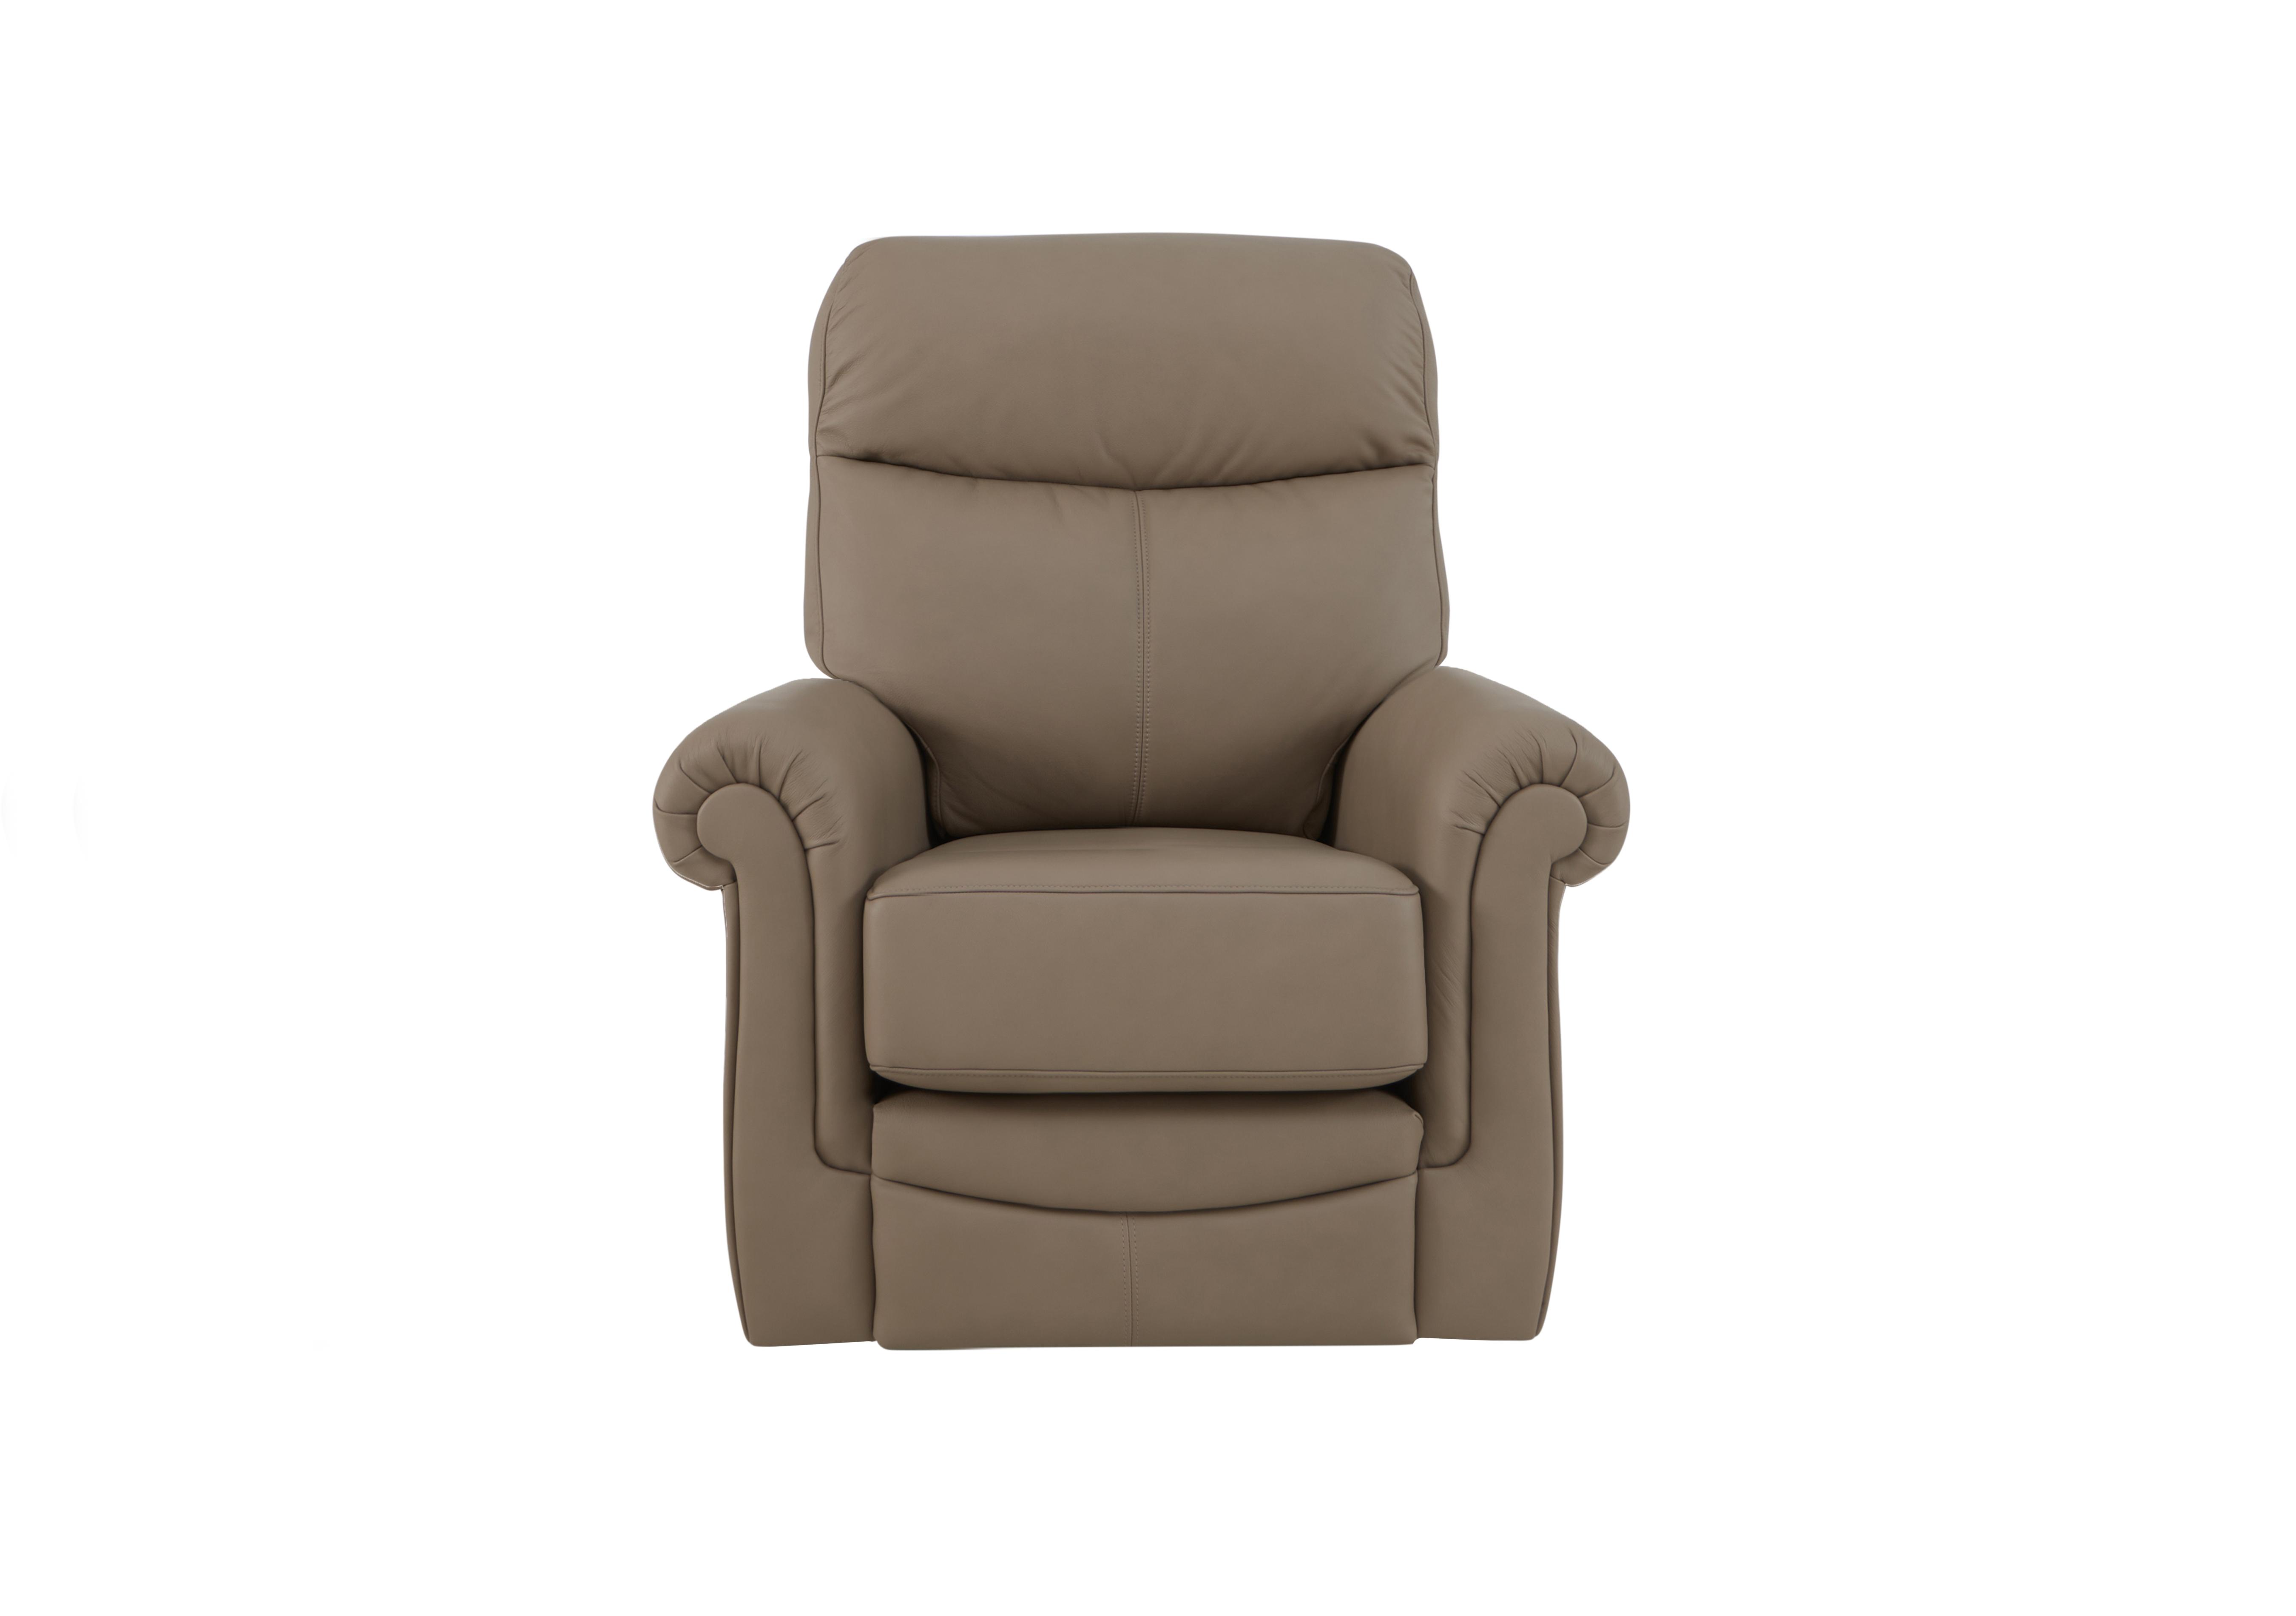 Avon Small Leather Armchair in L846 Cambridge Taupe on Furniture Village